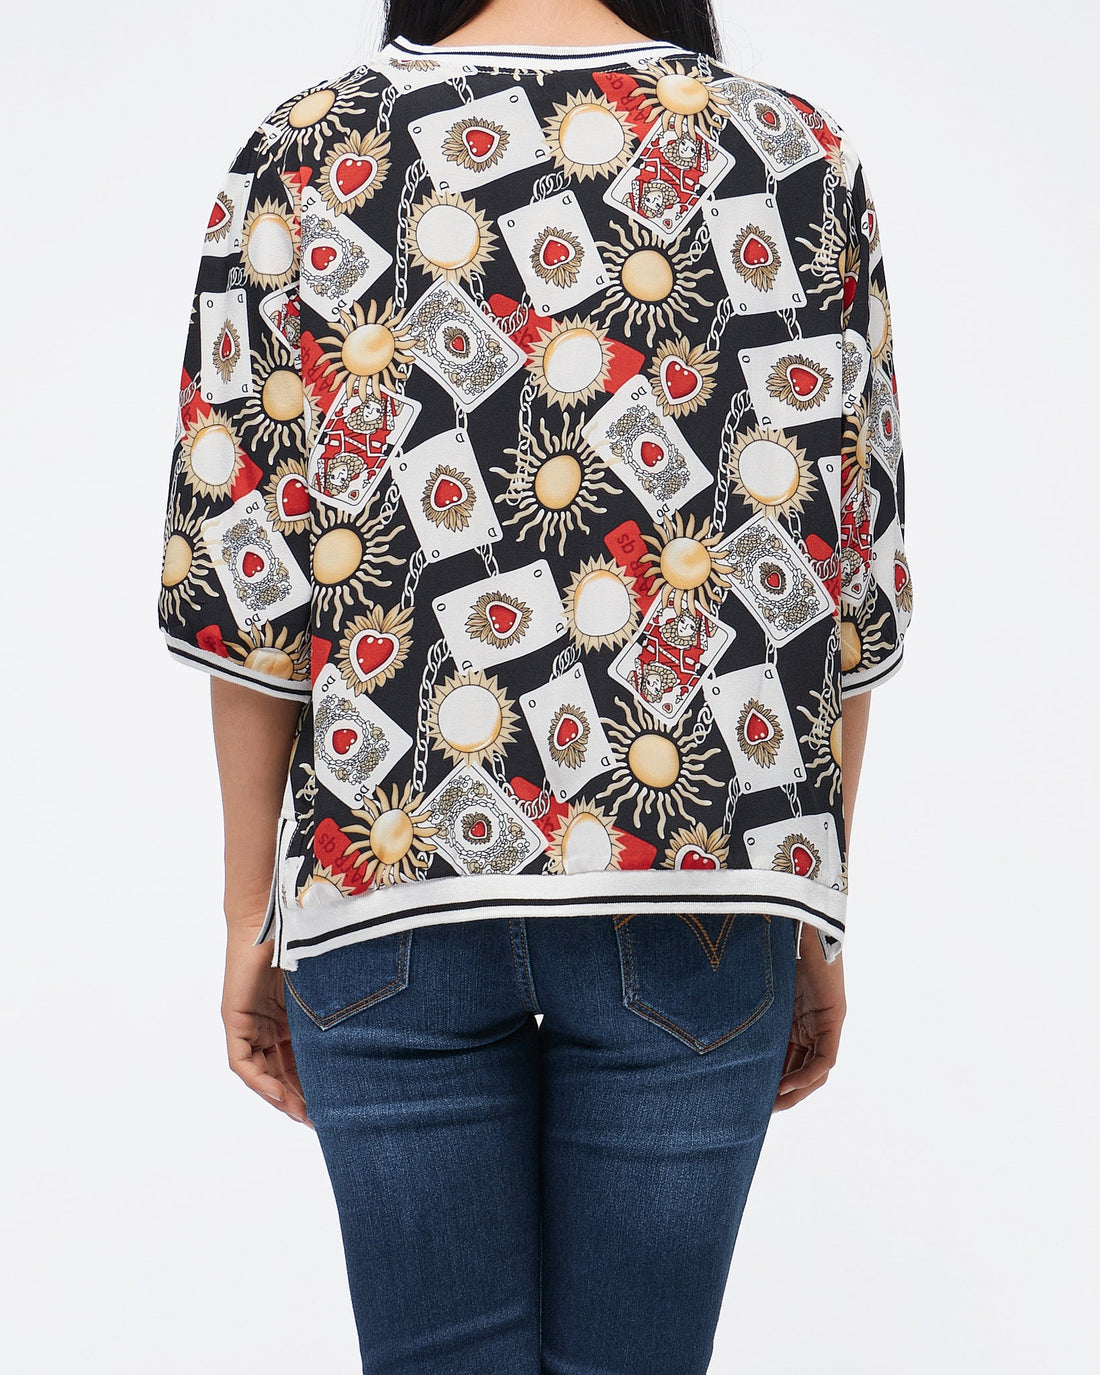 MOI OUTFIT-Playing Card Printed Lady Crop Top 15.90